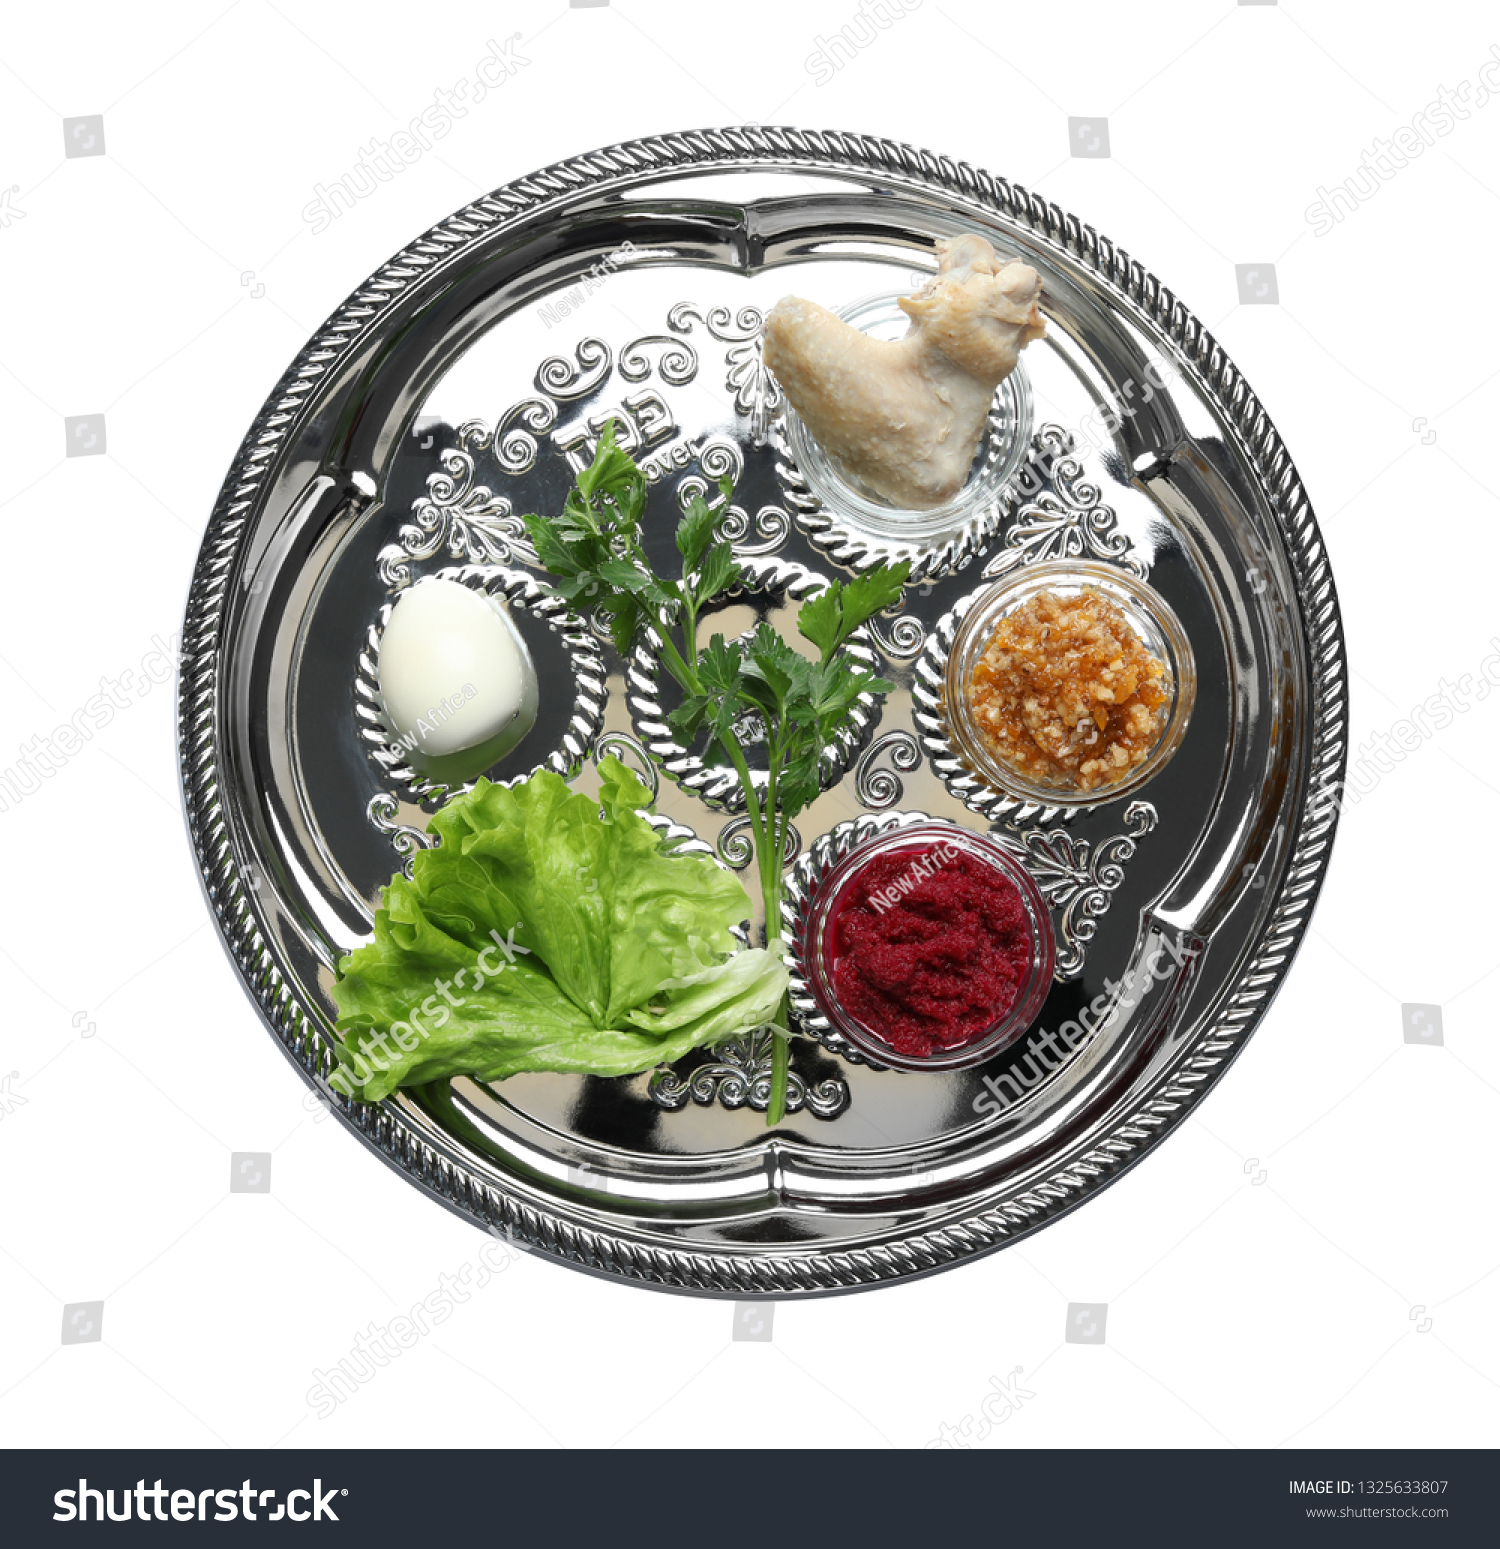 Traditional silver plate with symbolic meal for Passover (Pesach) Seder on white background, top view #1325633807